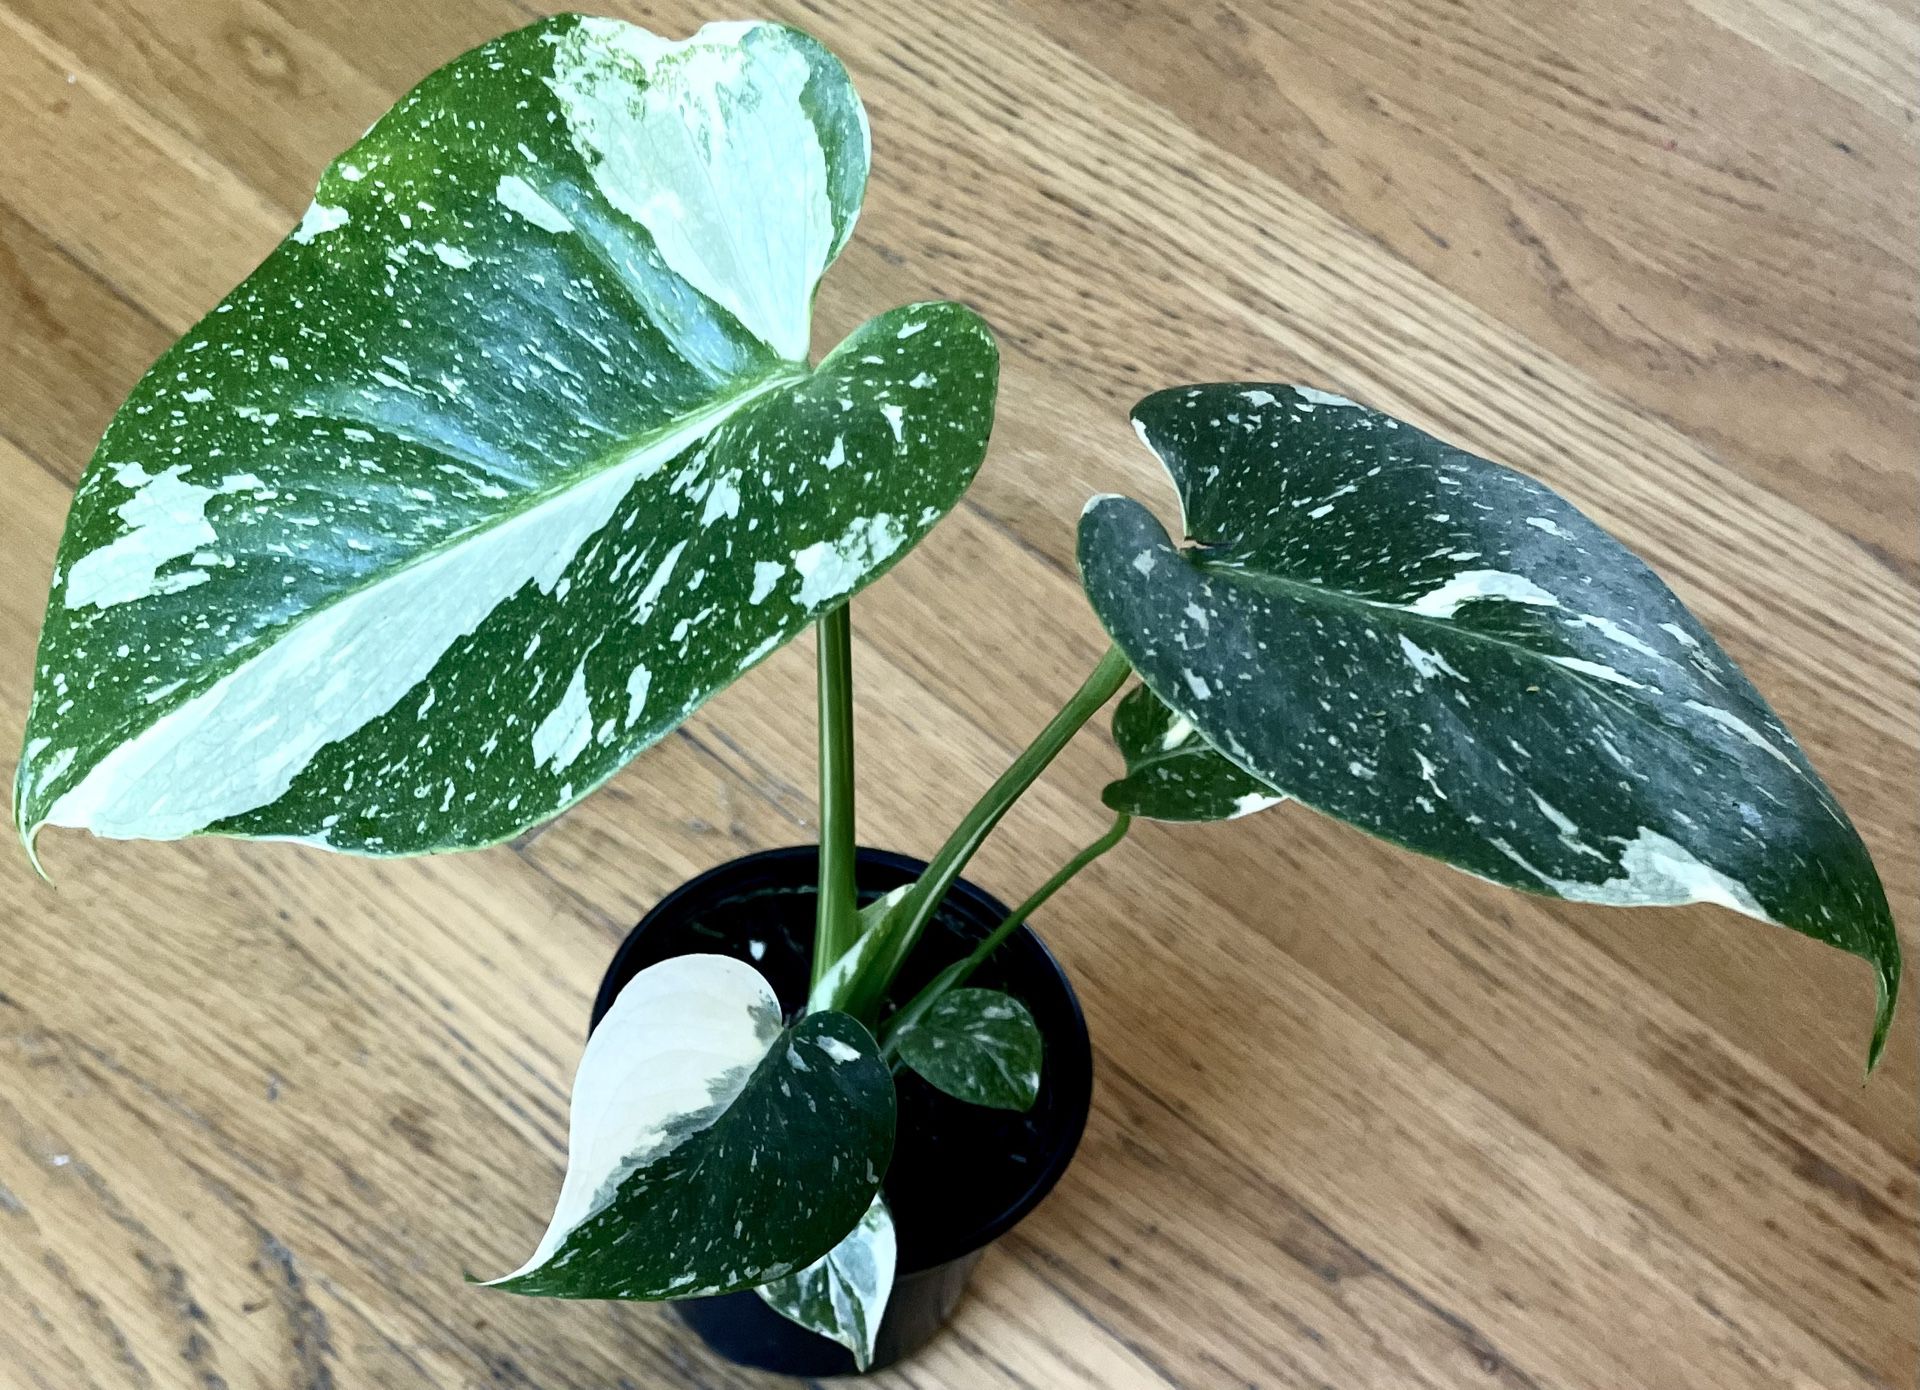 Rare Constellation Monstera Plant / Free Delivery Available 